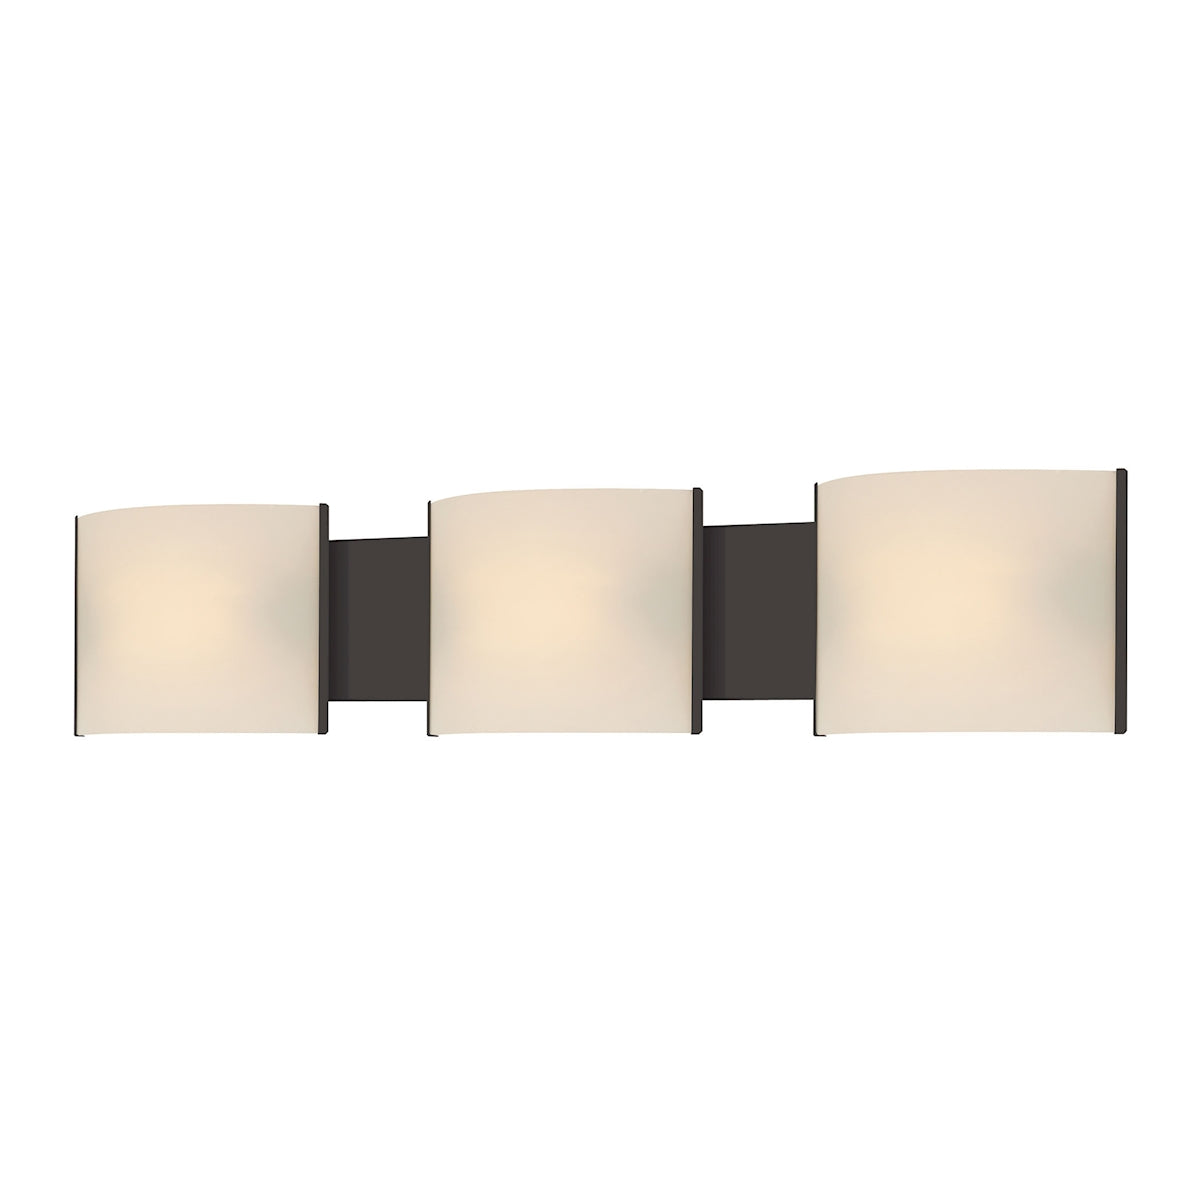 ELK Lighting BV713-10-45 Pannelli 3-Light Vanity Sconce in Oil Rubbed Bronze with Hand-formed White Opal Glass